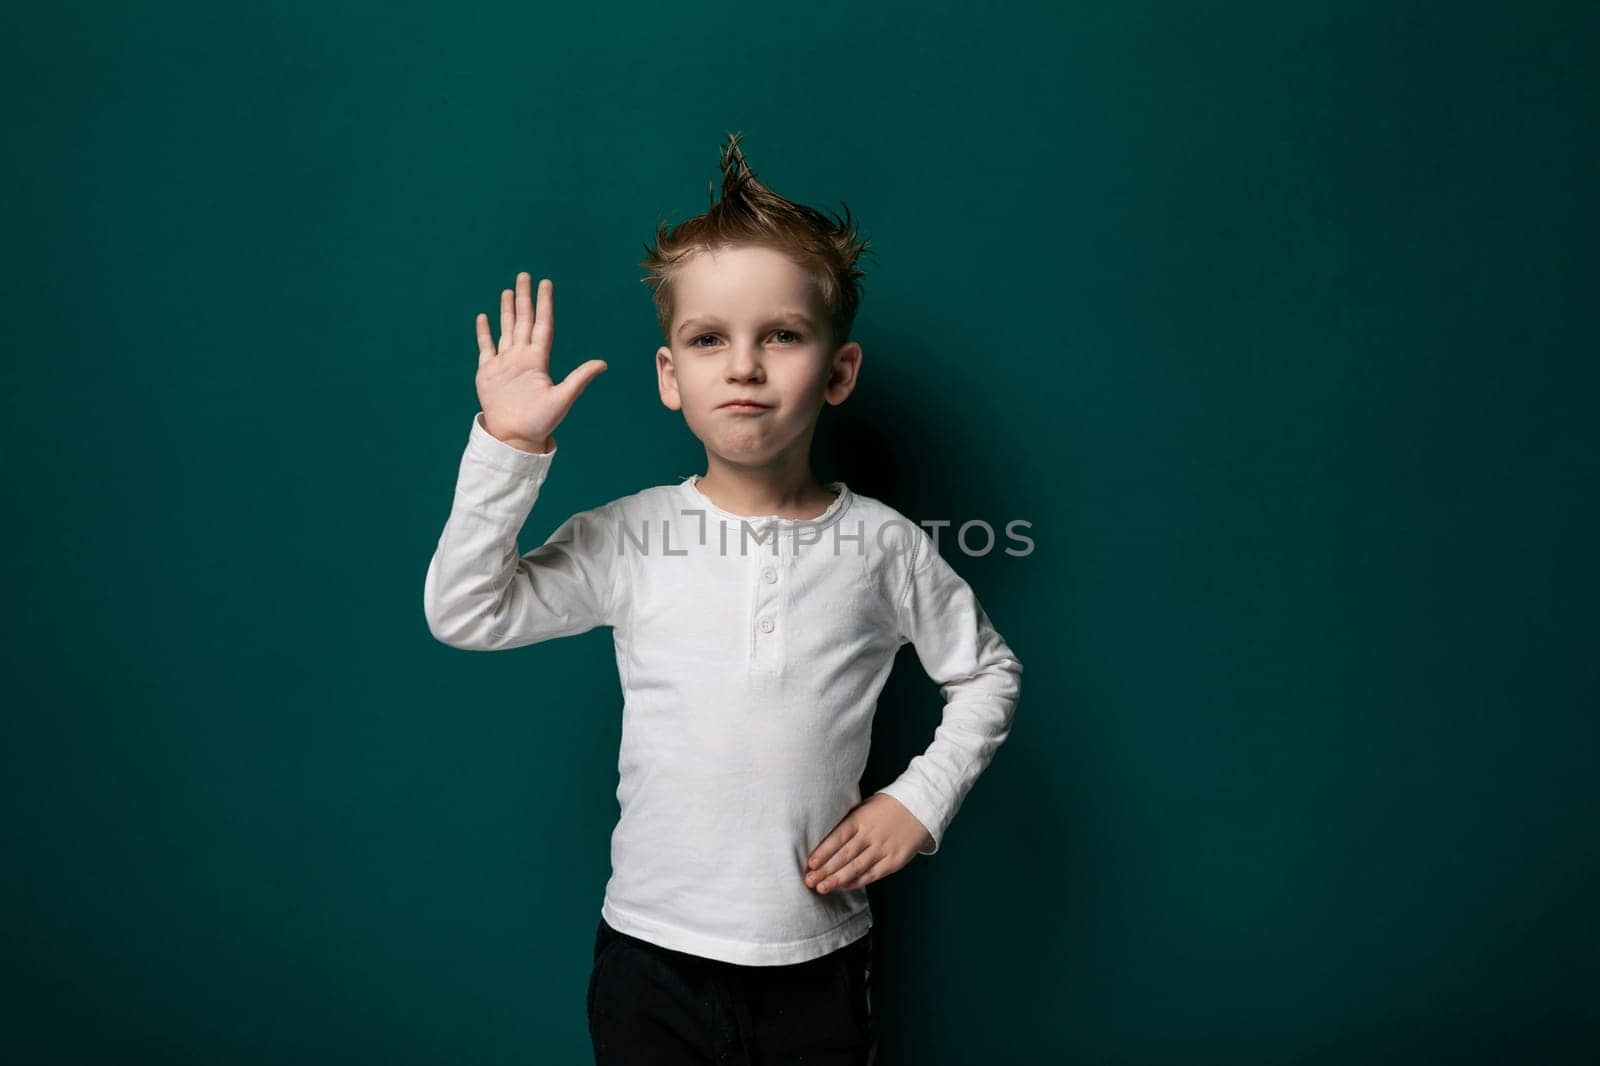 A young male child is standing in front of a vibrant green wall. He appears curious and engaged, perhaps examining the texture or color of the wall. The boy is wearing casual clothing and seems to be in a public space.